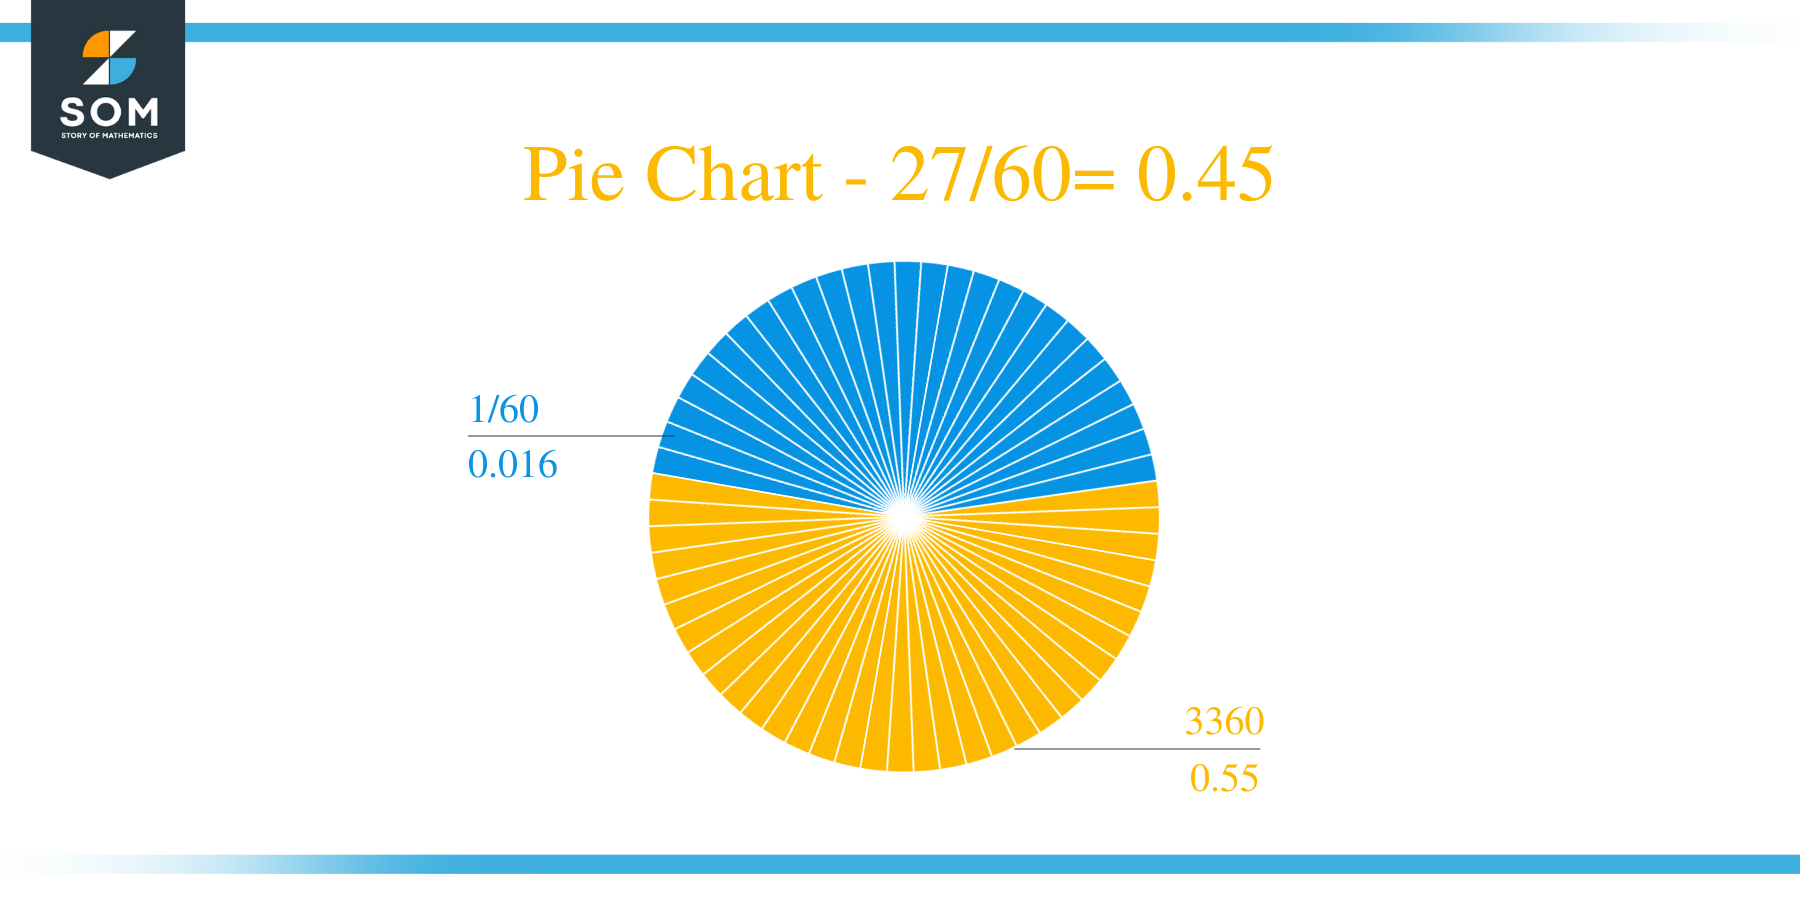 Pie Chart 27 by 60 Long Division Method